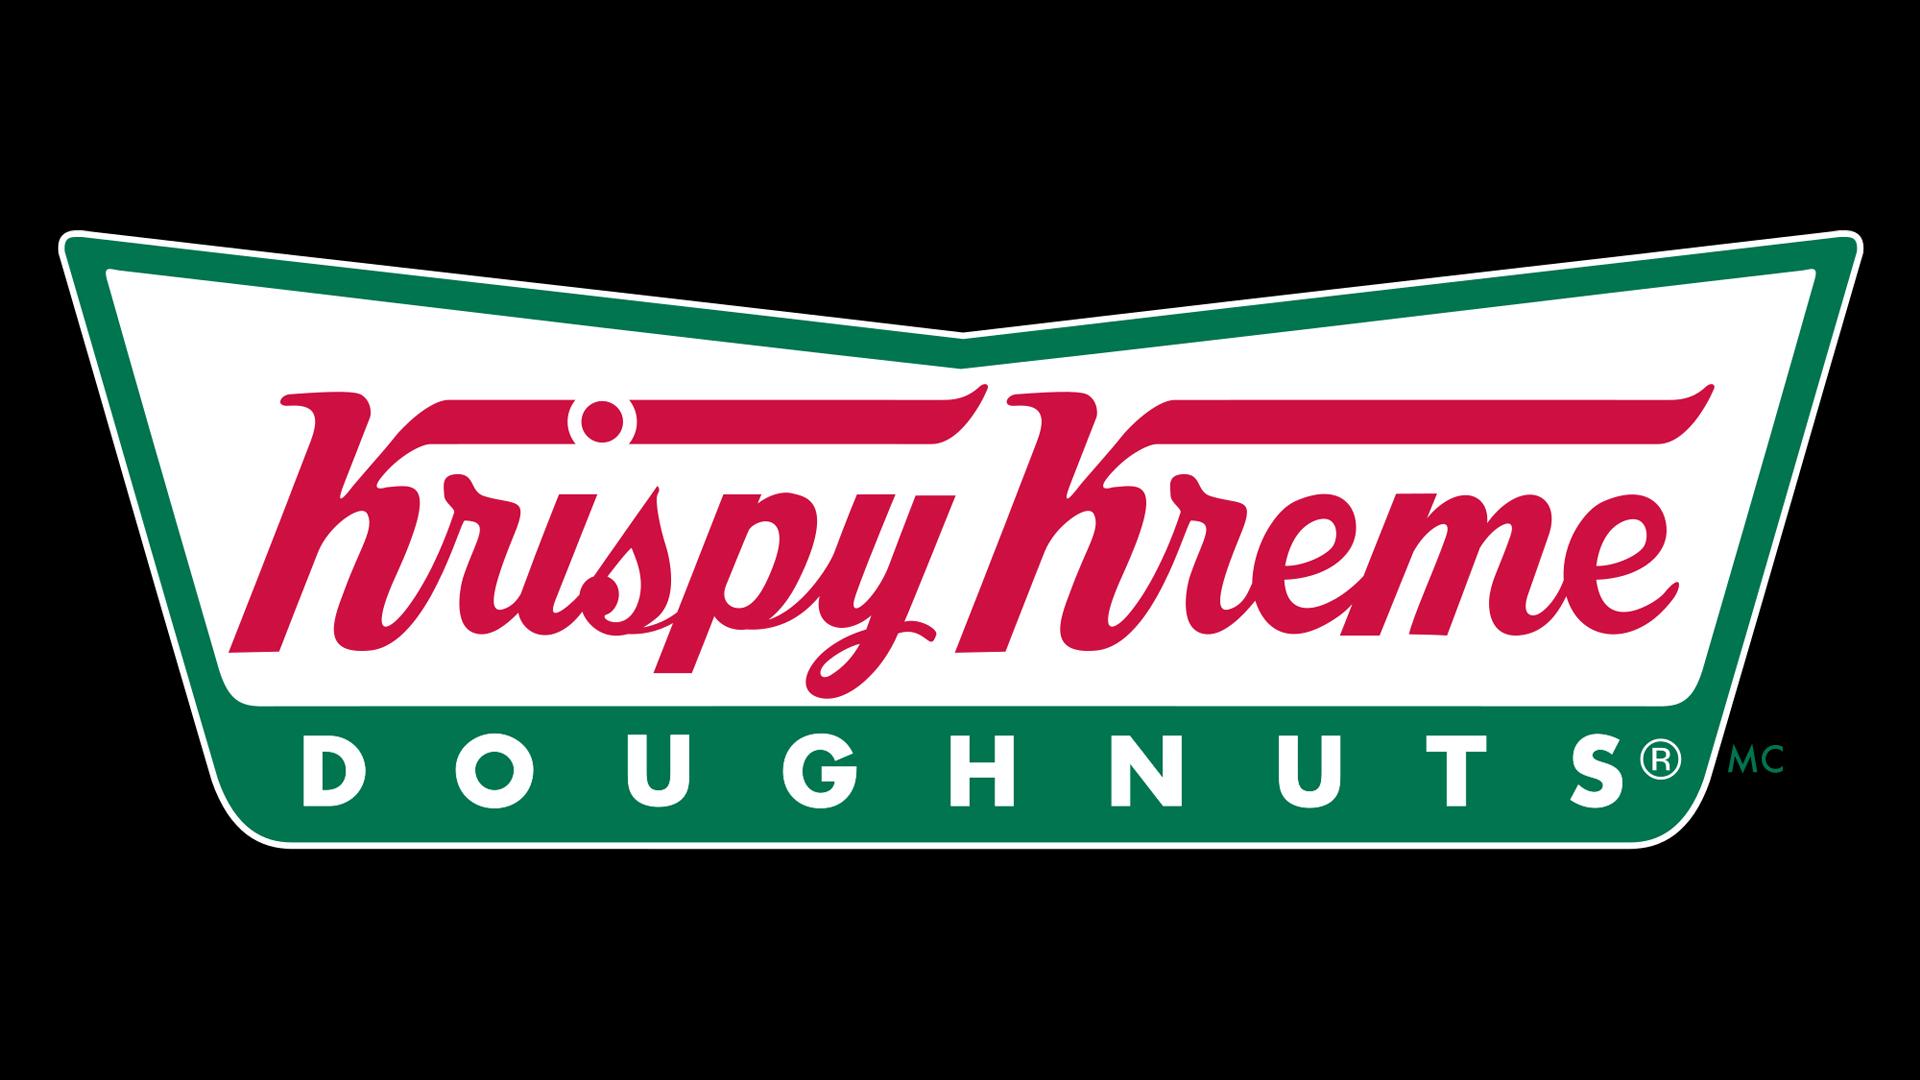 Krispy Kreme Logo - Krispy Kreme Logo, Krispy Kreme Symbol, Meaning, History and Evolution